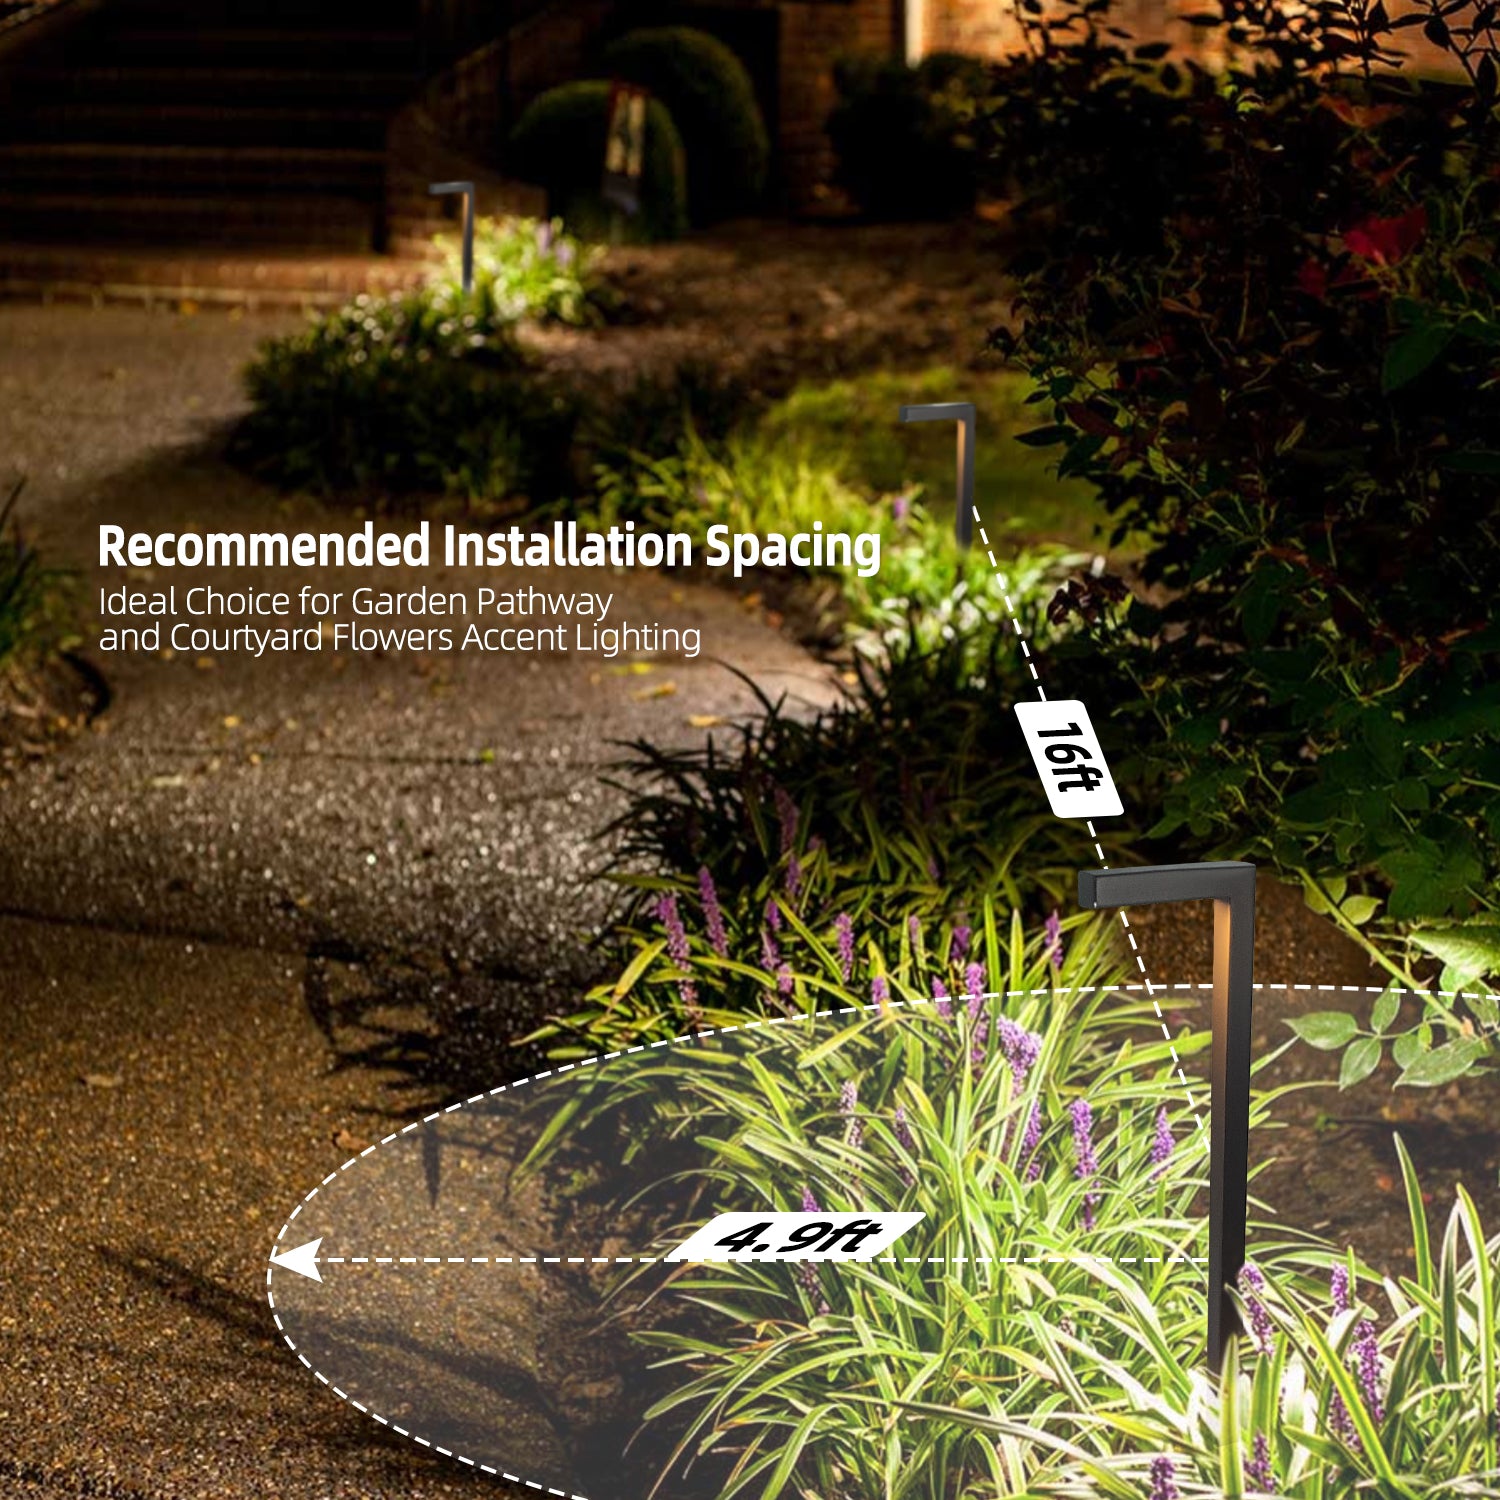 Nighttime garden with low voltage brass pathway lights, illuminating green plants and pathway. Recommended installation spacing with 16ft between lights and 4.9ft radius coverage.